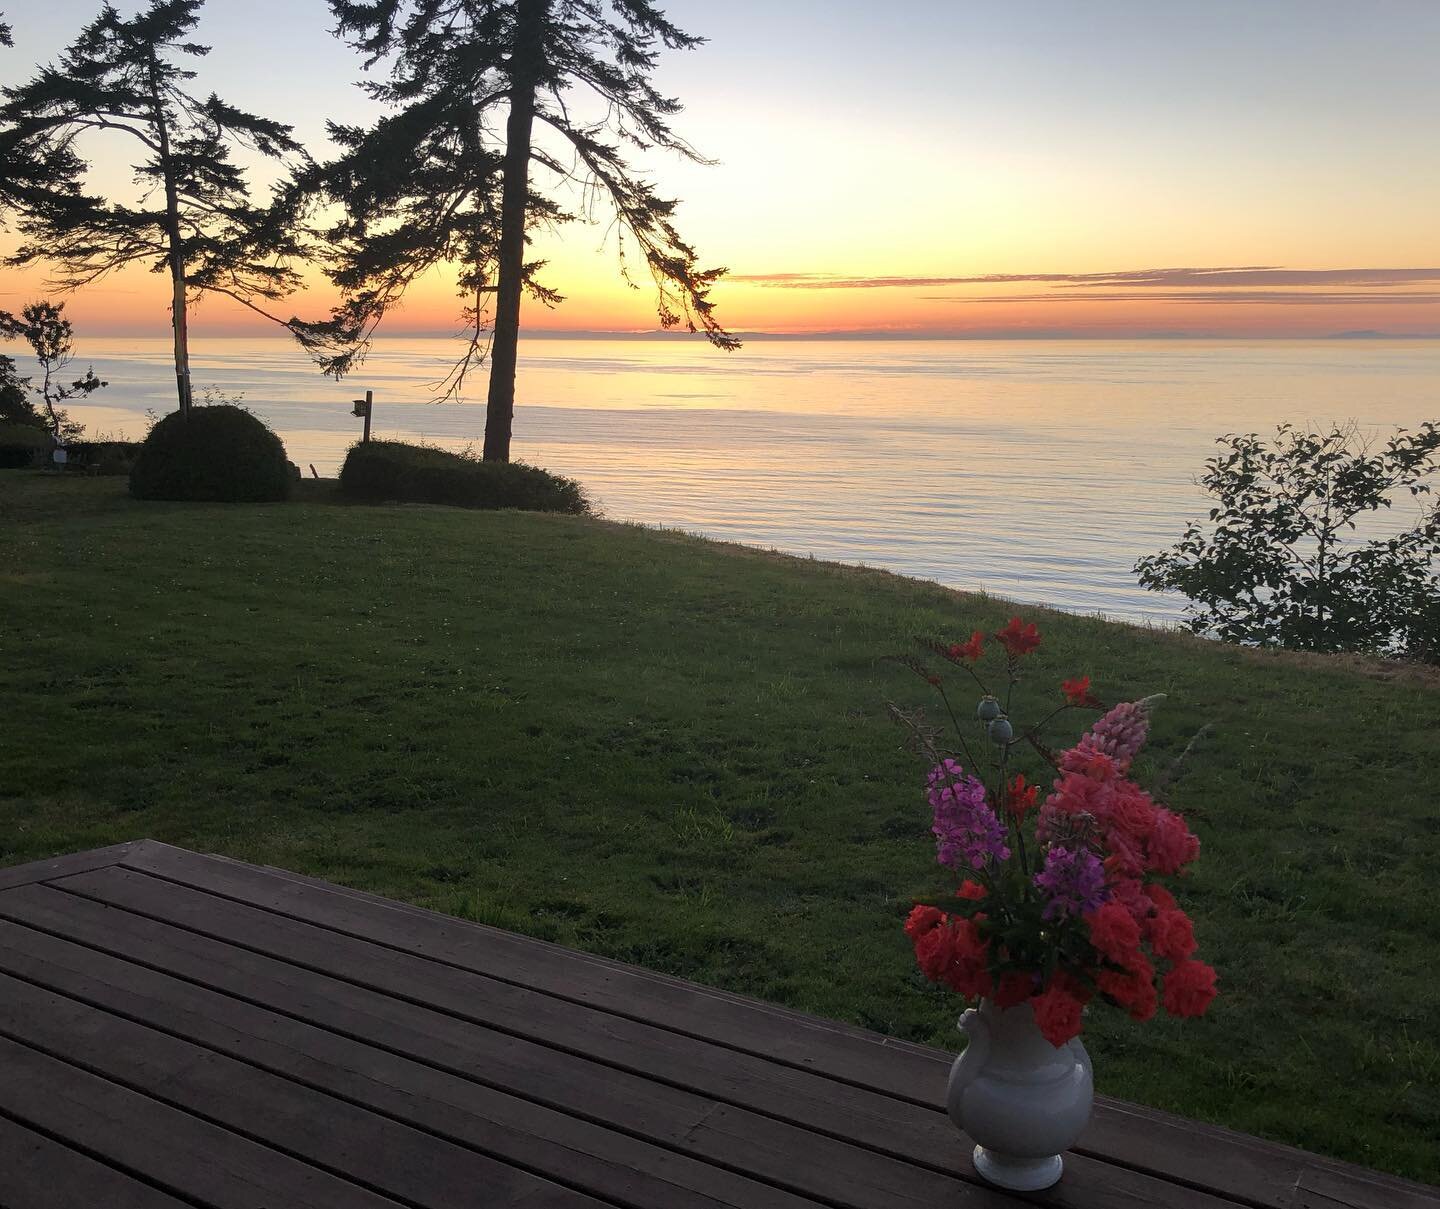 I can&rsquo;t think of a better place to have a fun time painting and sipping than right here. Join me tomorrow night (Tuesday july 19) overlooking the Straight of Juan de Fuca. #paintnsip details in my website #porttownsend #pnw #watercolor #feather